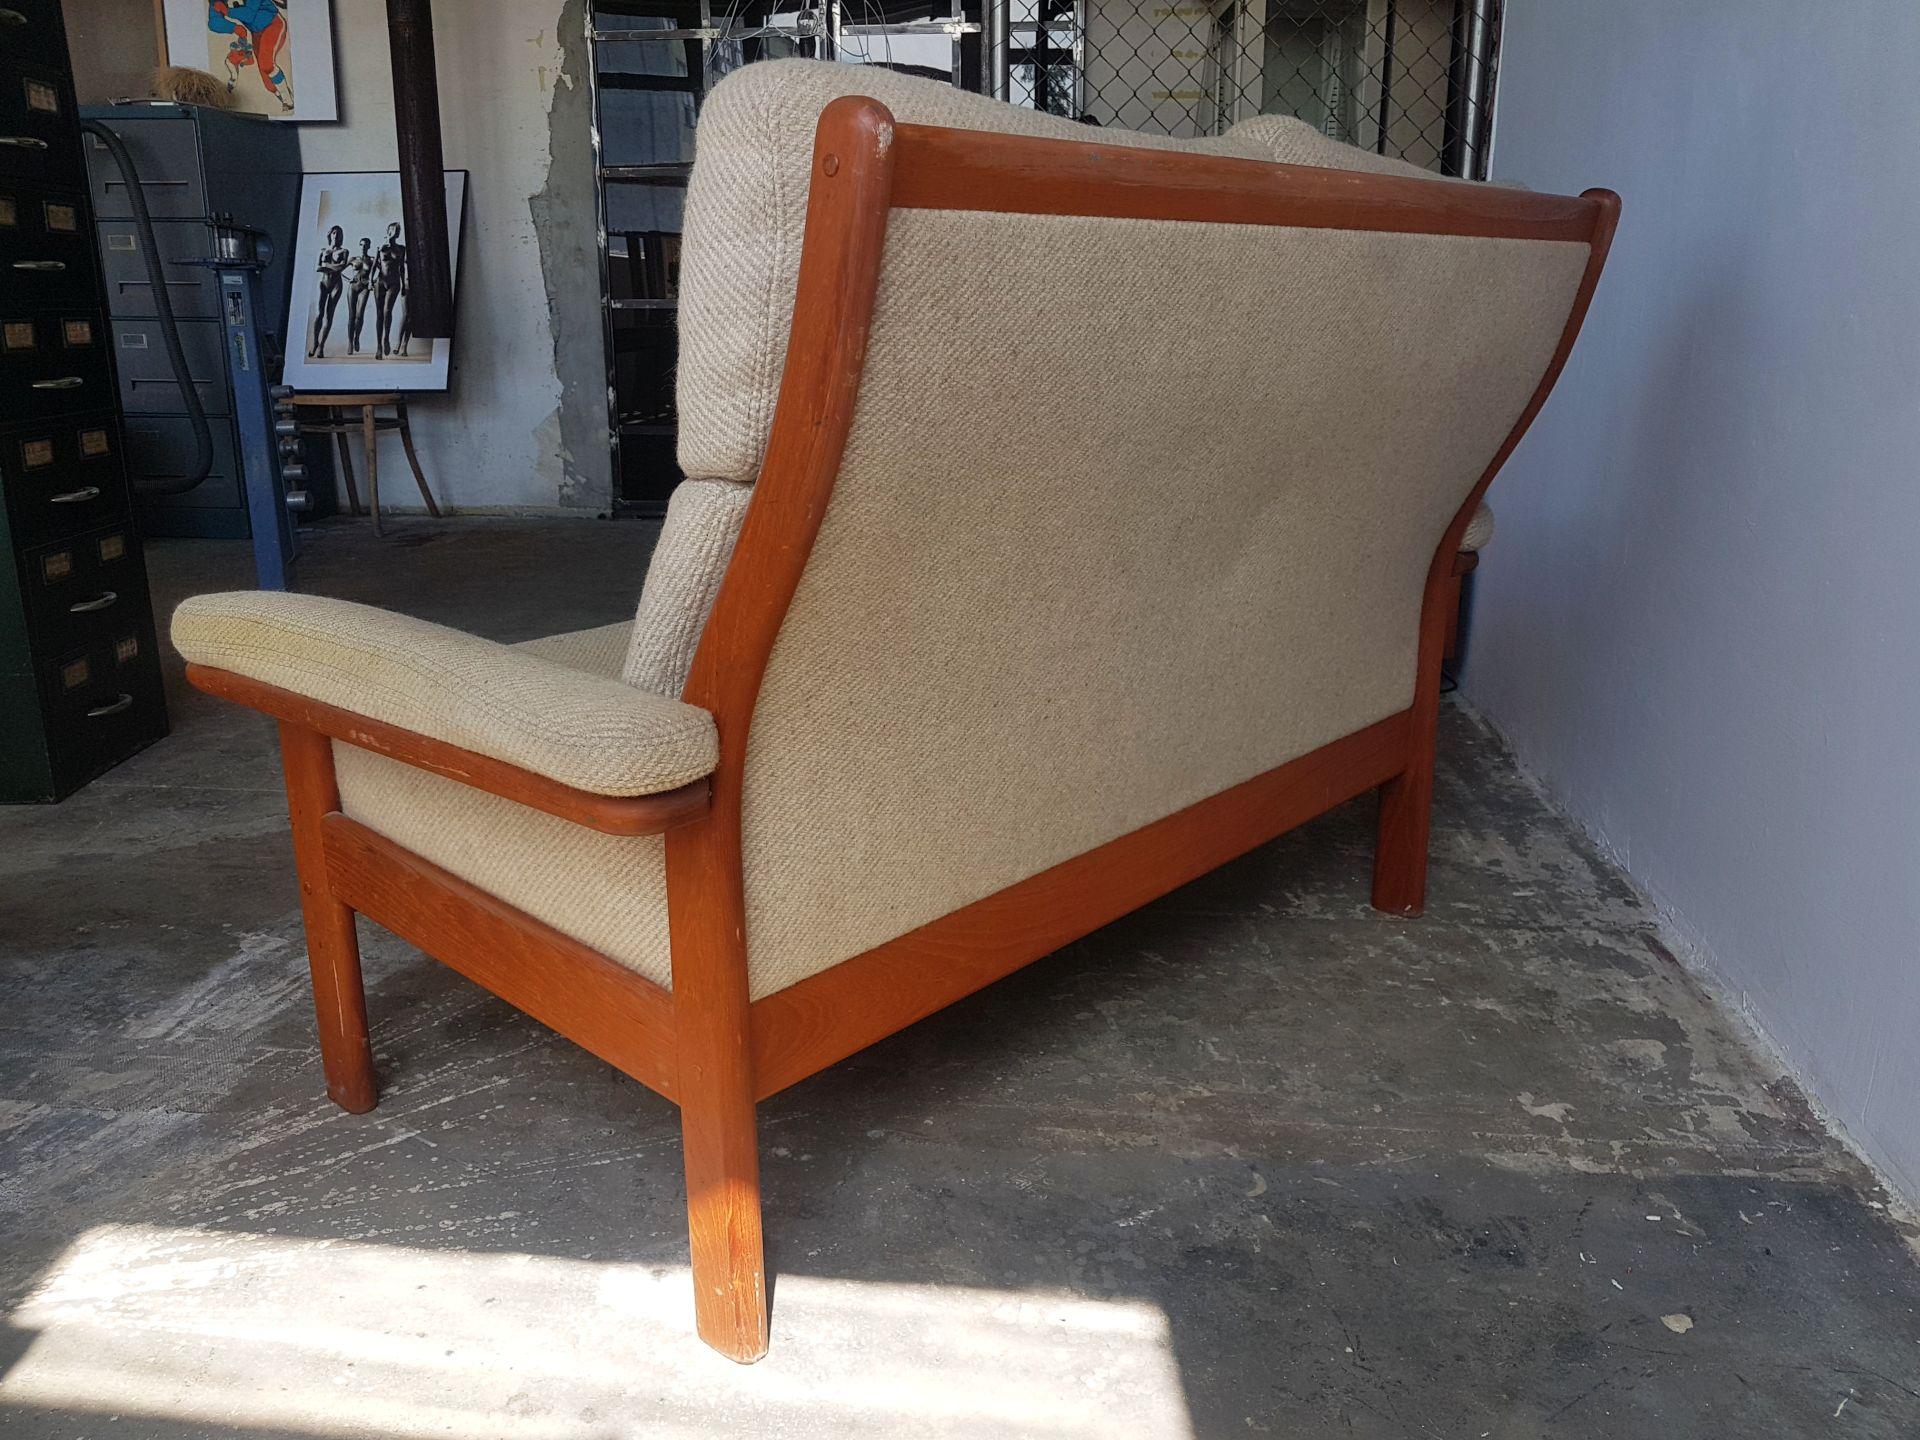 This comfortable two-seat sofa has a frame in solid teak and thick wool upholstery.